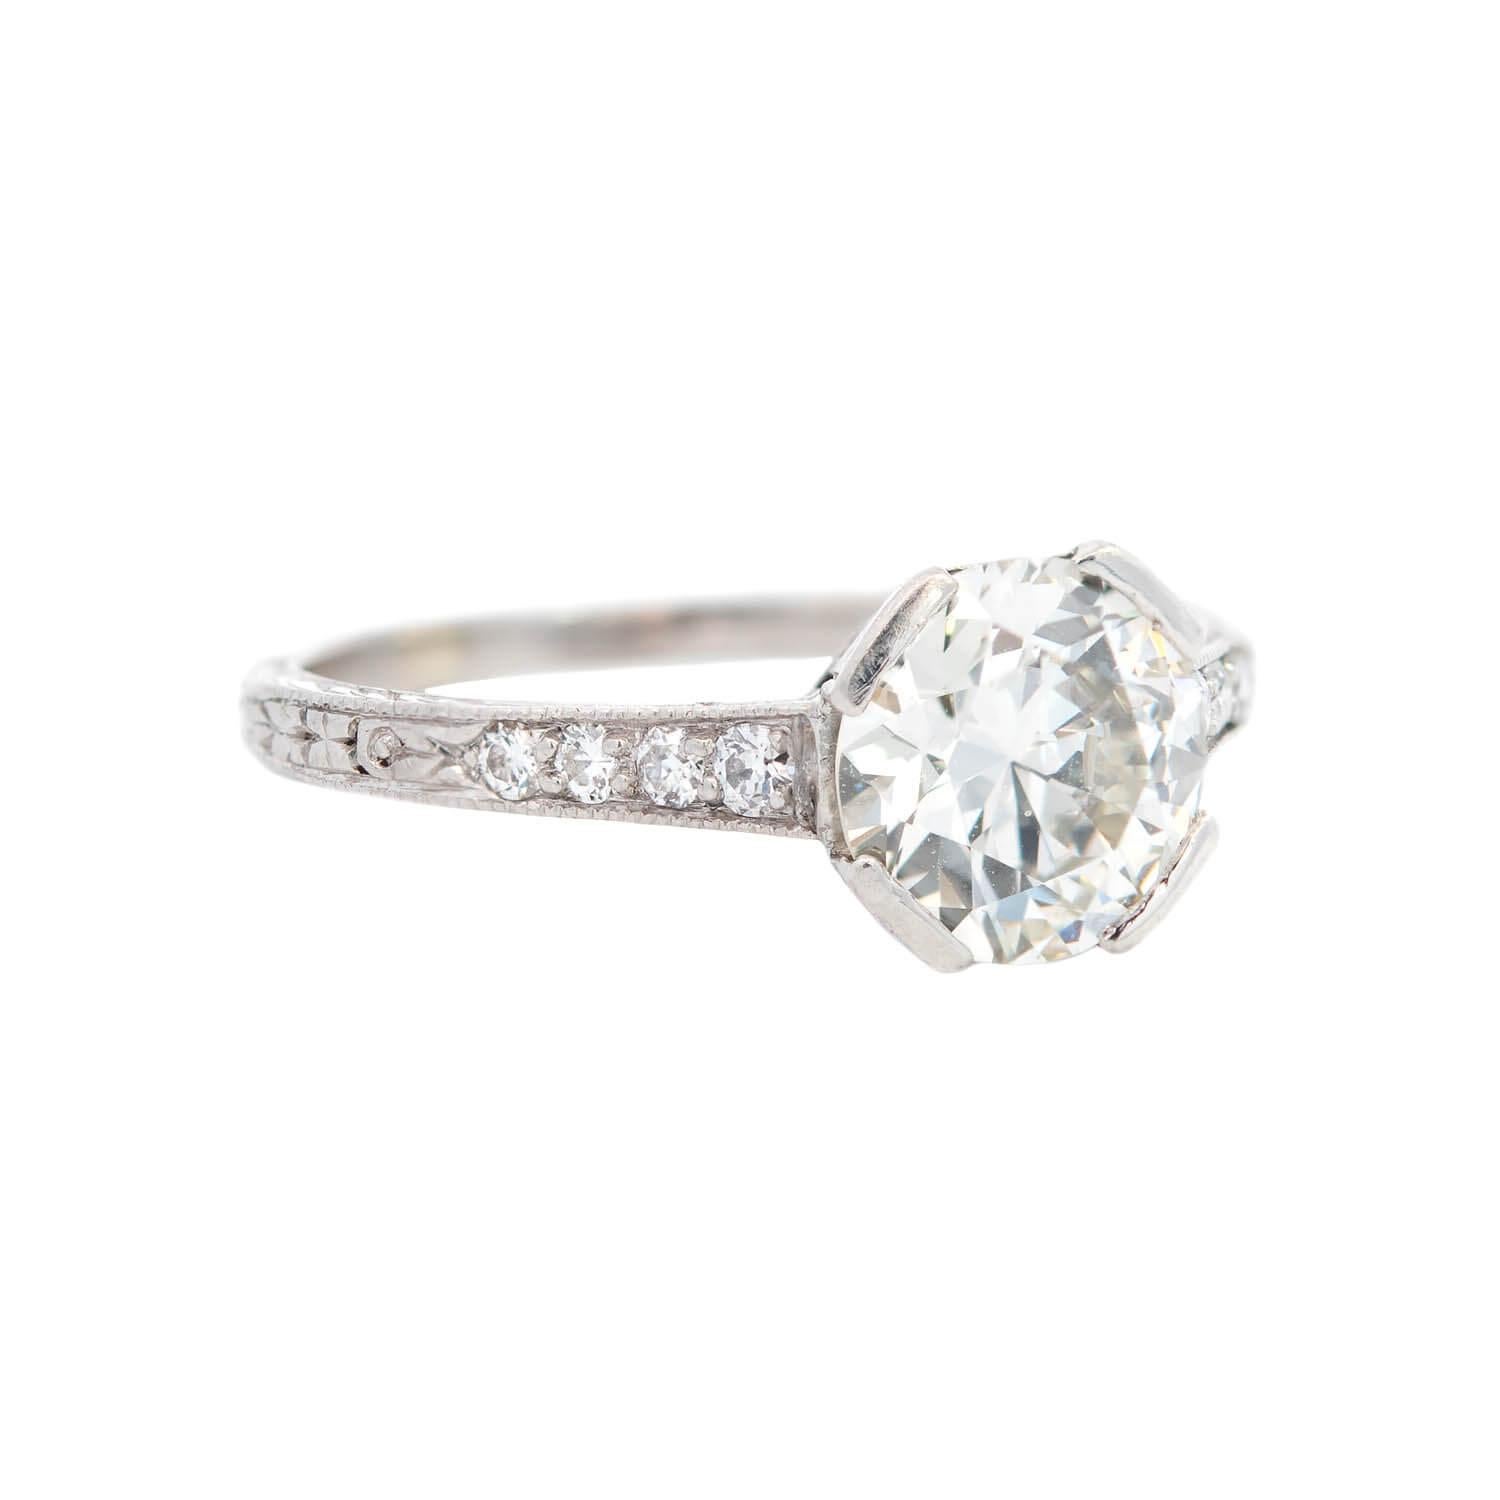 A simply breathtaking Tiffany & Co. engagement ring from the Art Deco (ca1930) era! Resting at the center of the platinum four bar claw mounting is a sparkling old European cut diamond. The center stone weighs approximately 1.25ct and is I/J color